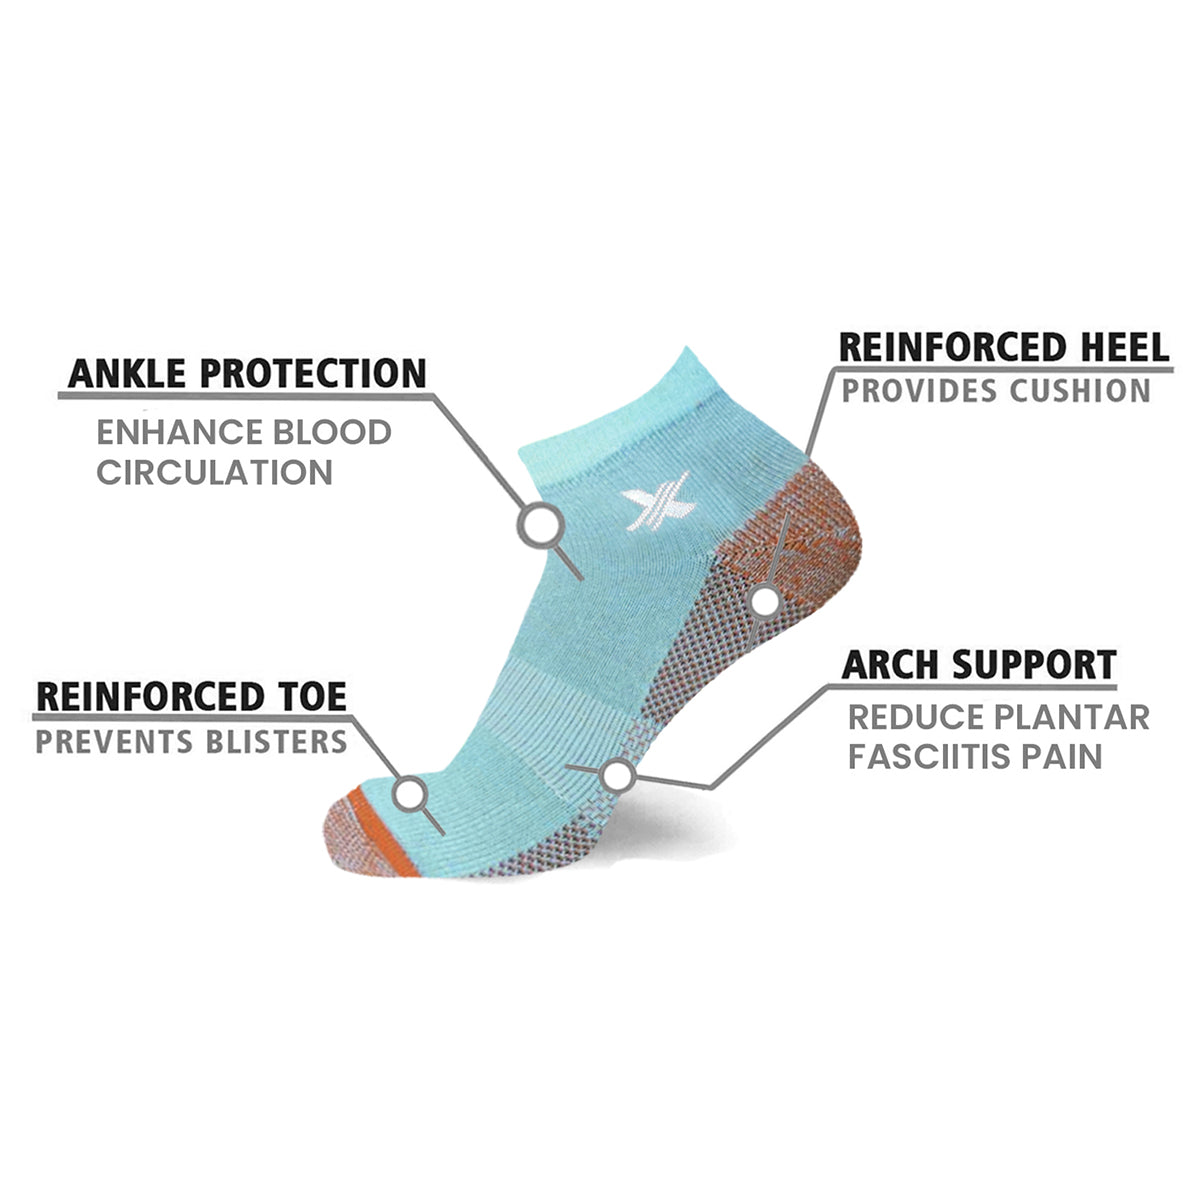 Copper-Infused Ankle Compression Socks (3-Pairs)